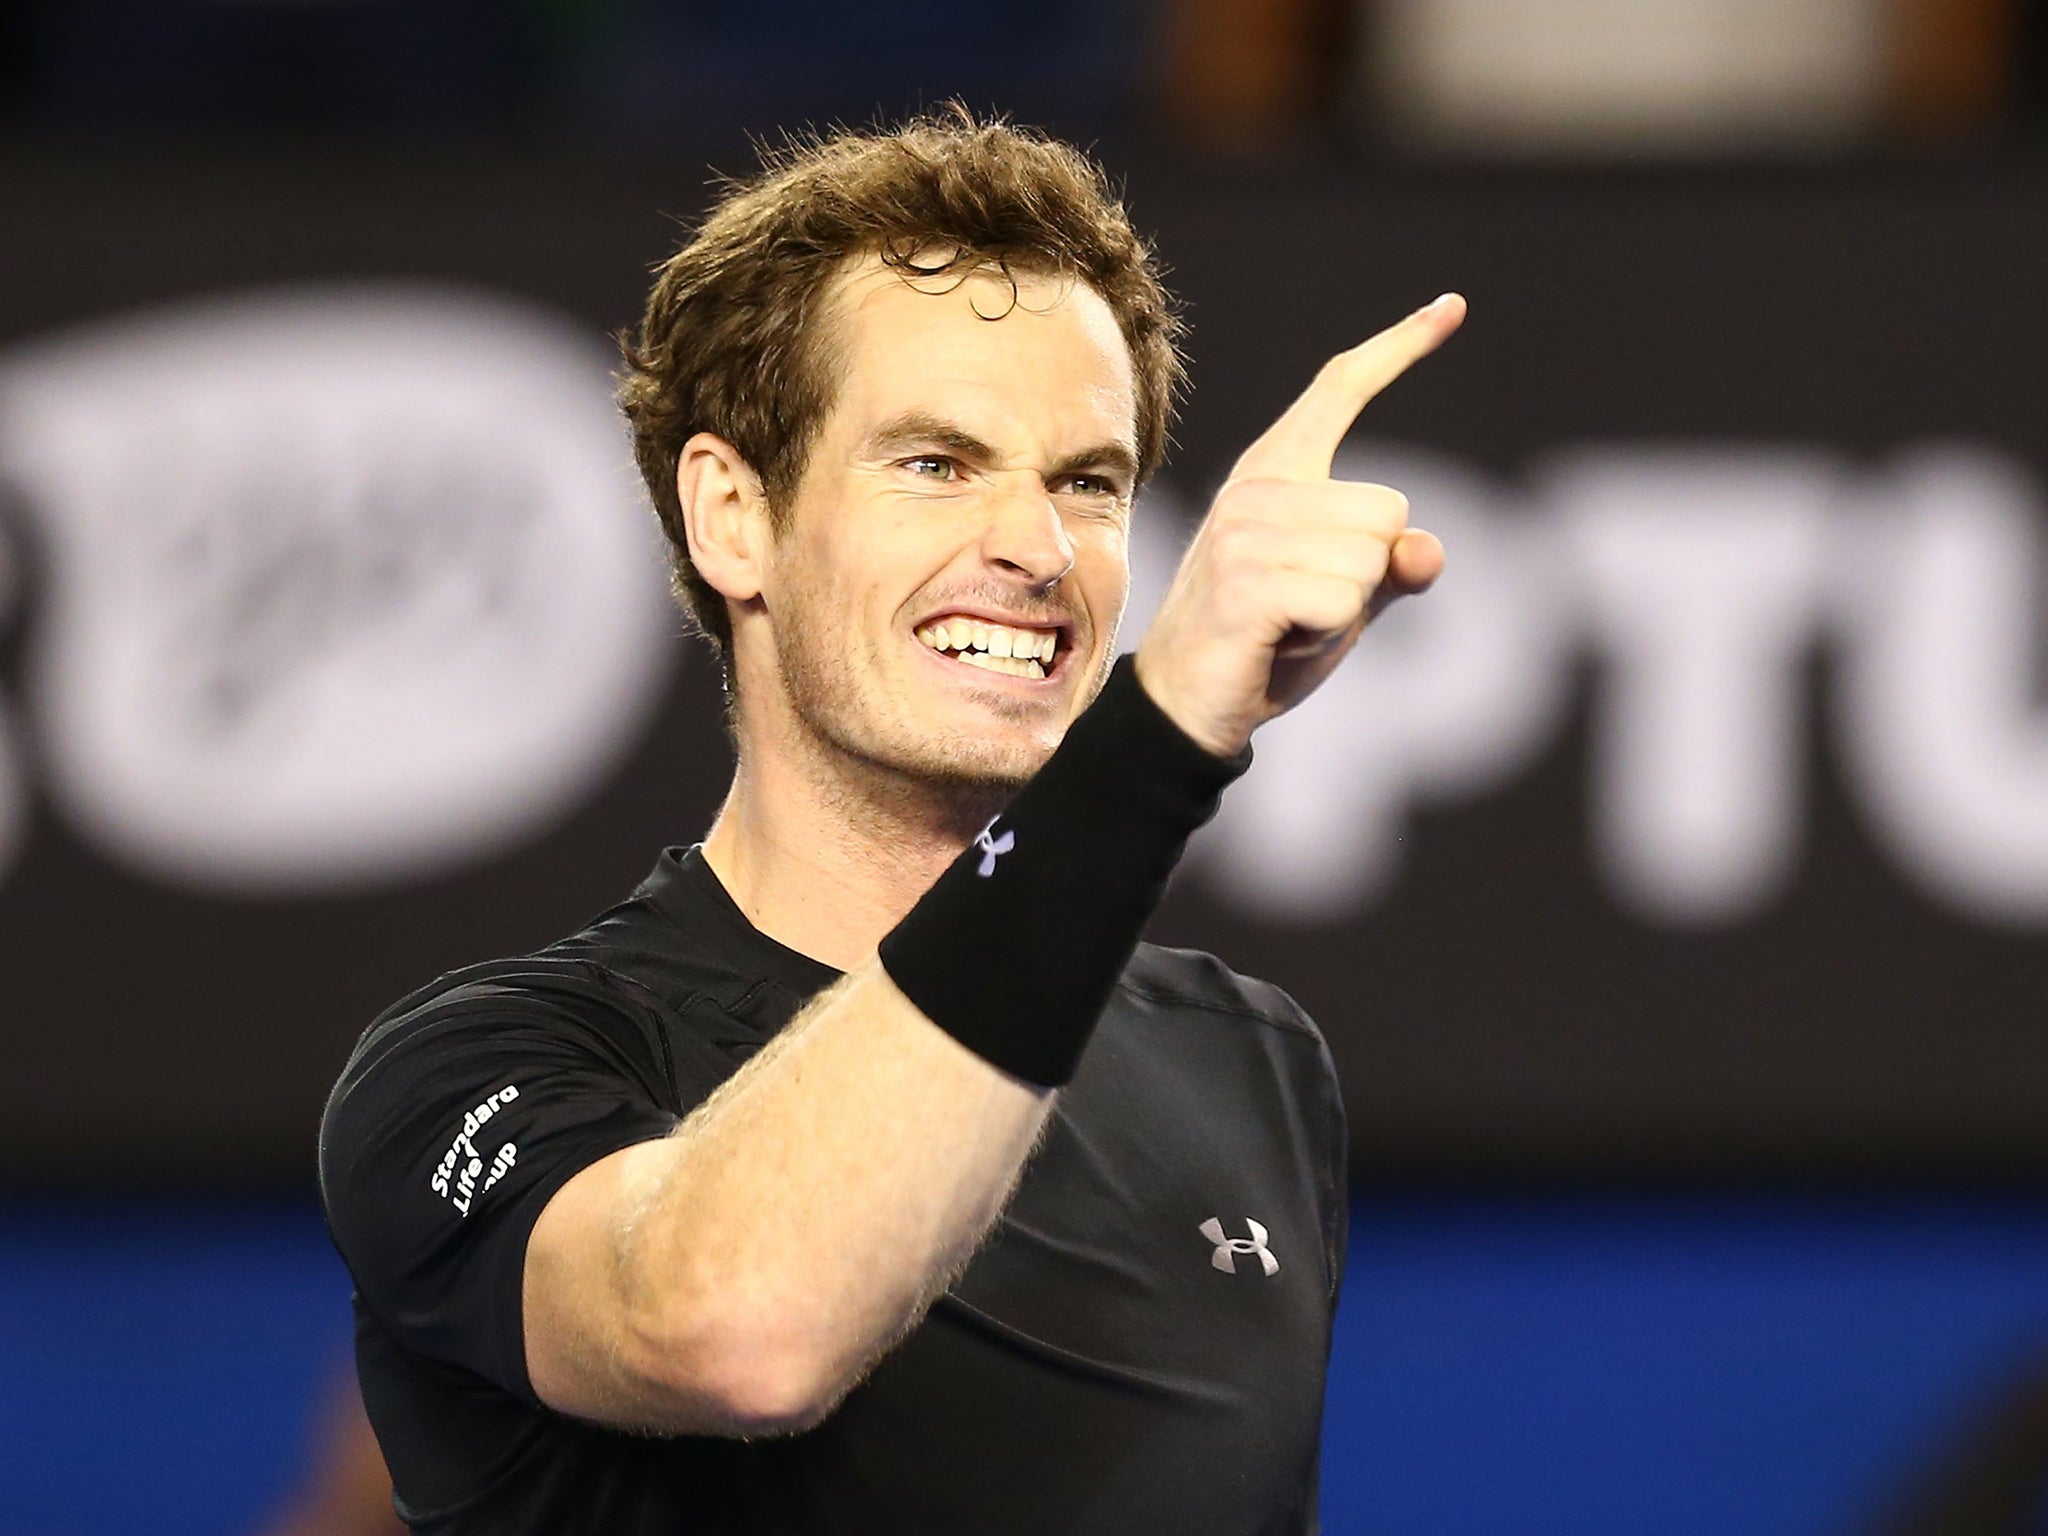 Andy Murray reaches the final of the Australian Open after beating Tomas Berdych in another impressive display, but the match was marred by ill feeling